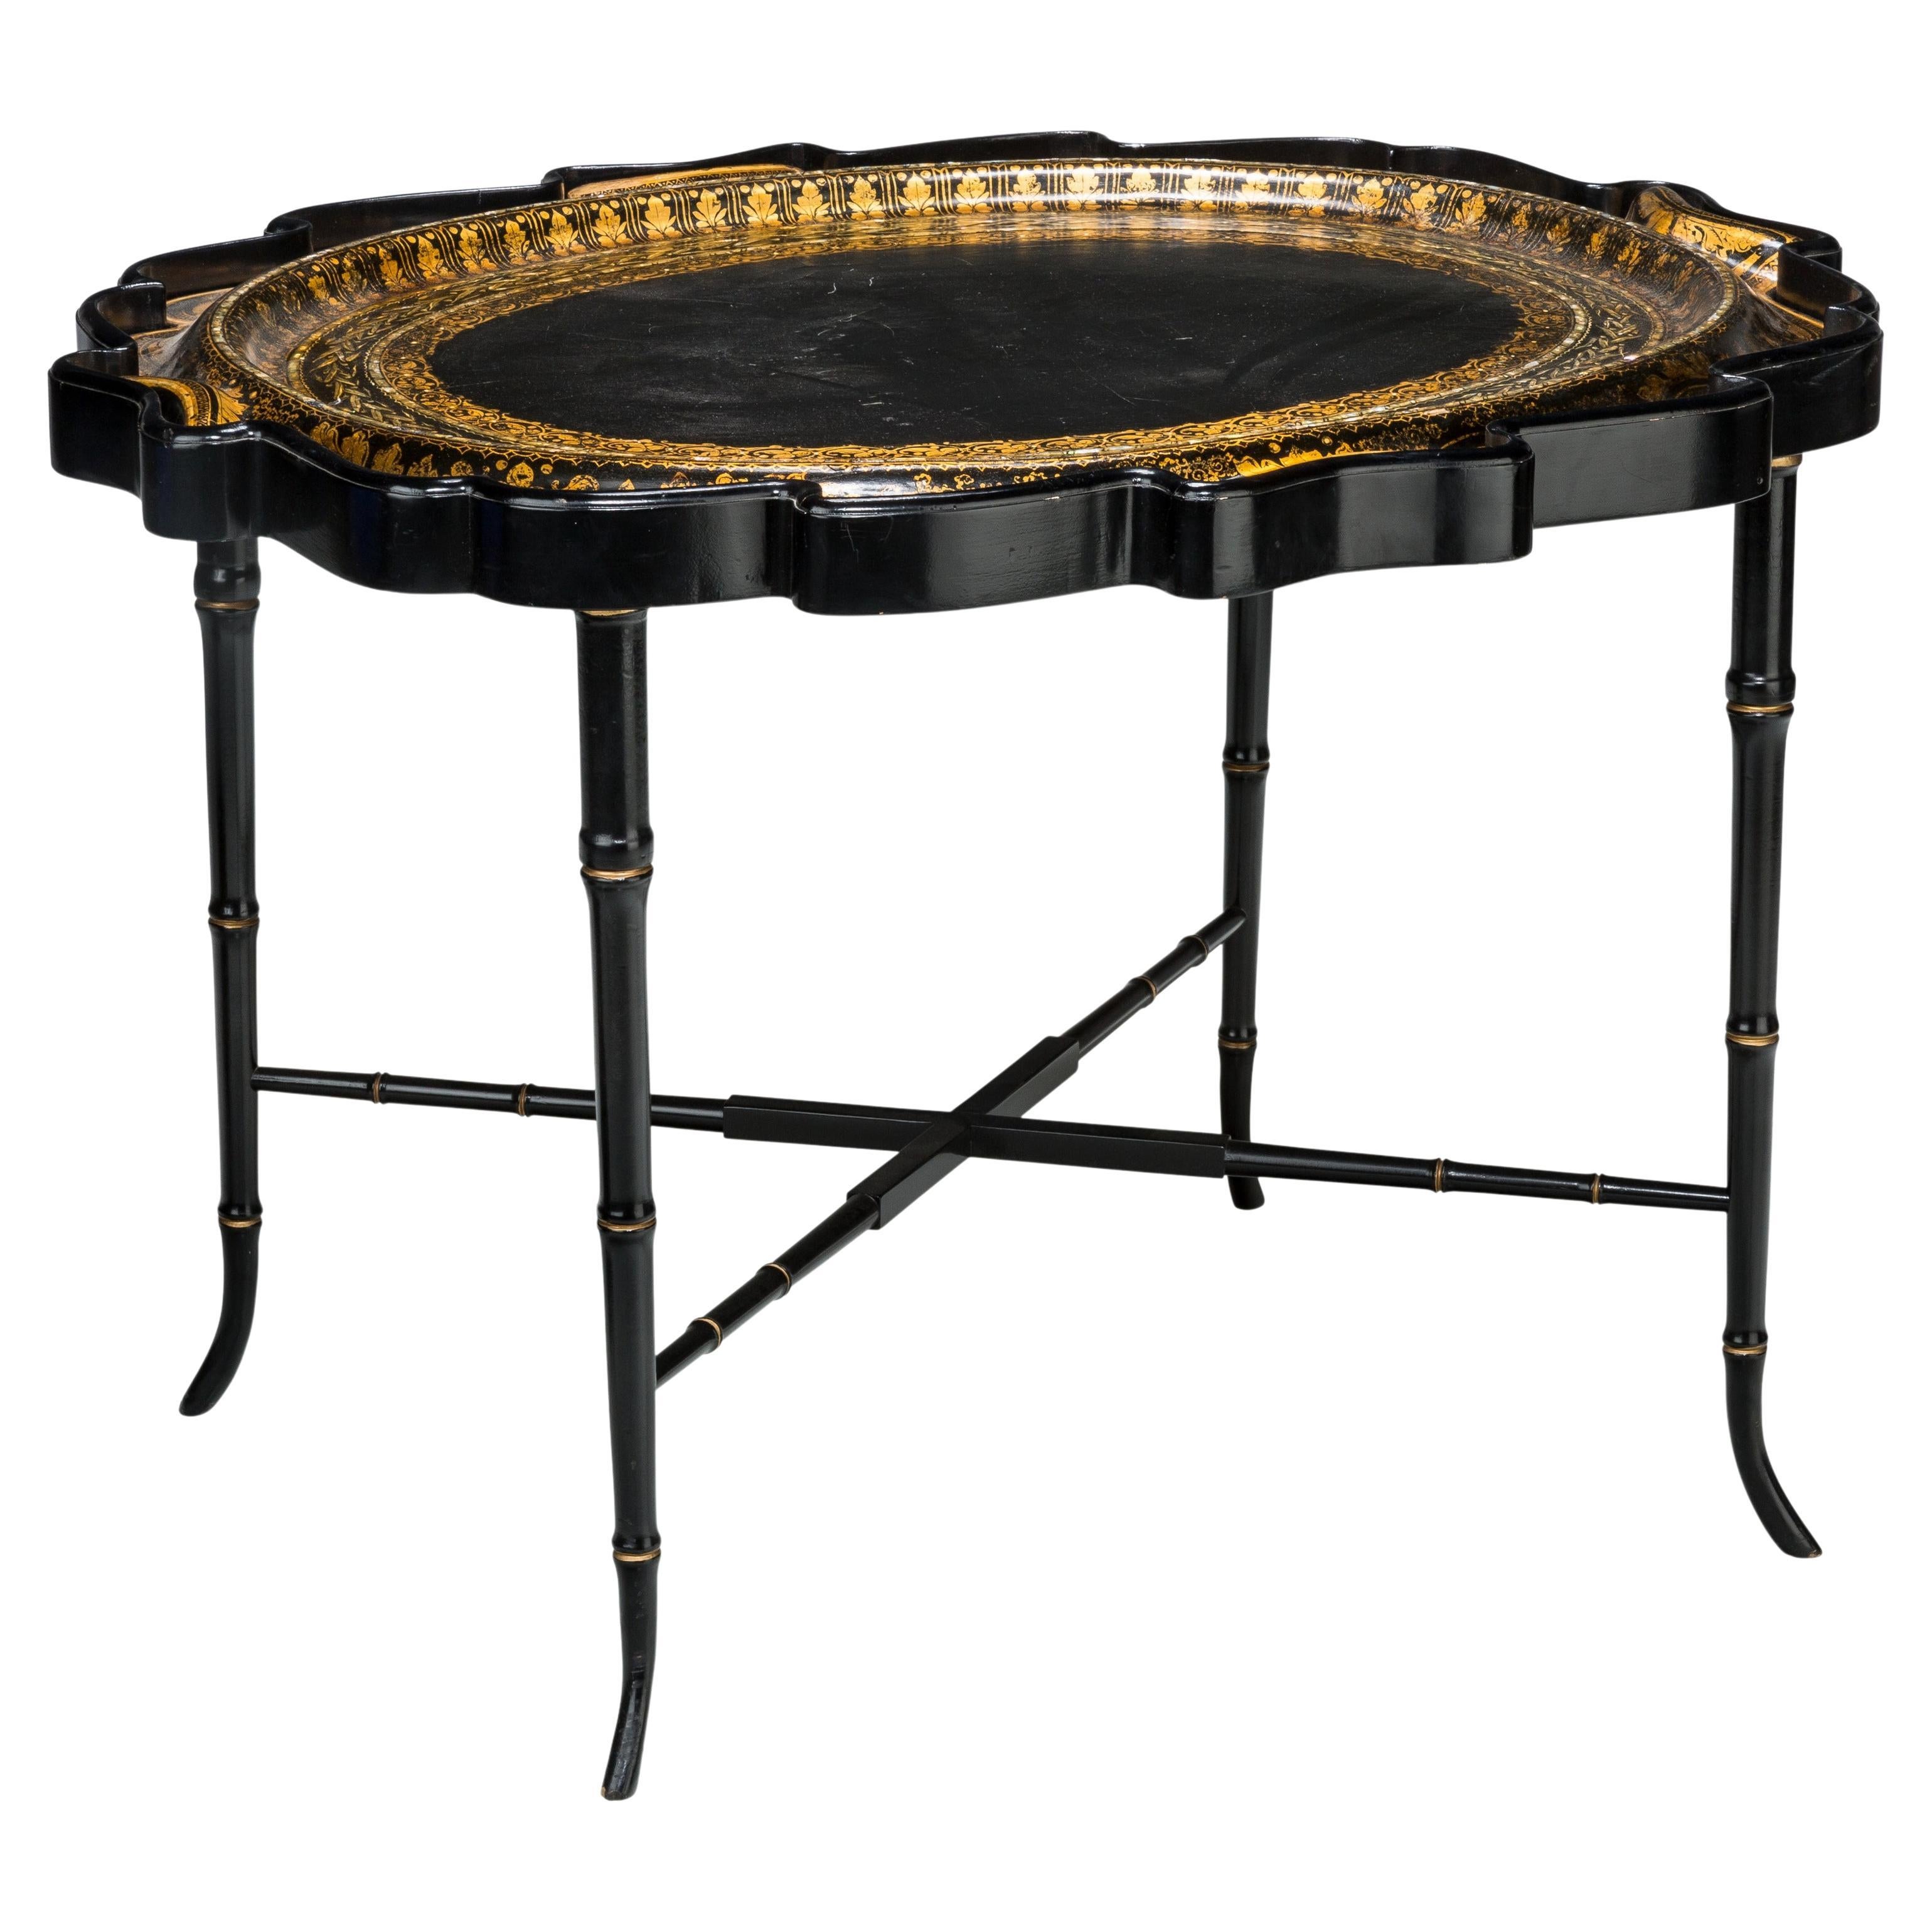 19c English Partial Gilt Paper Mache Tray Table, 19c MOP Inlaid   For Sale